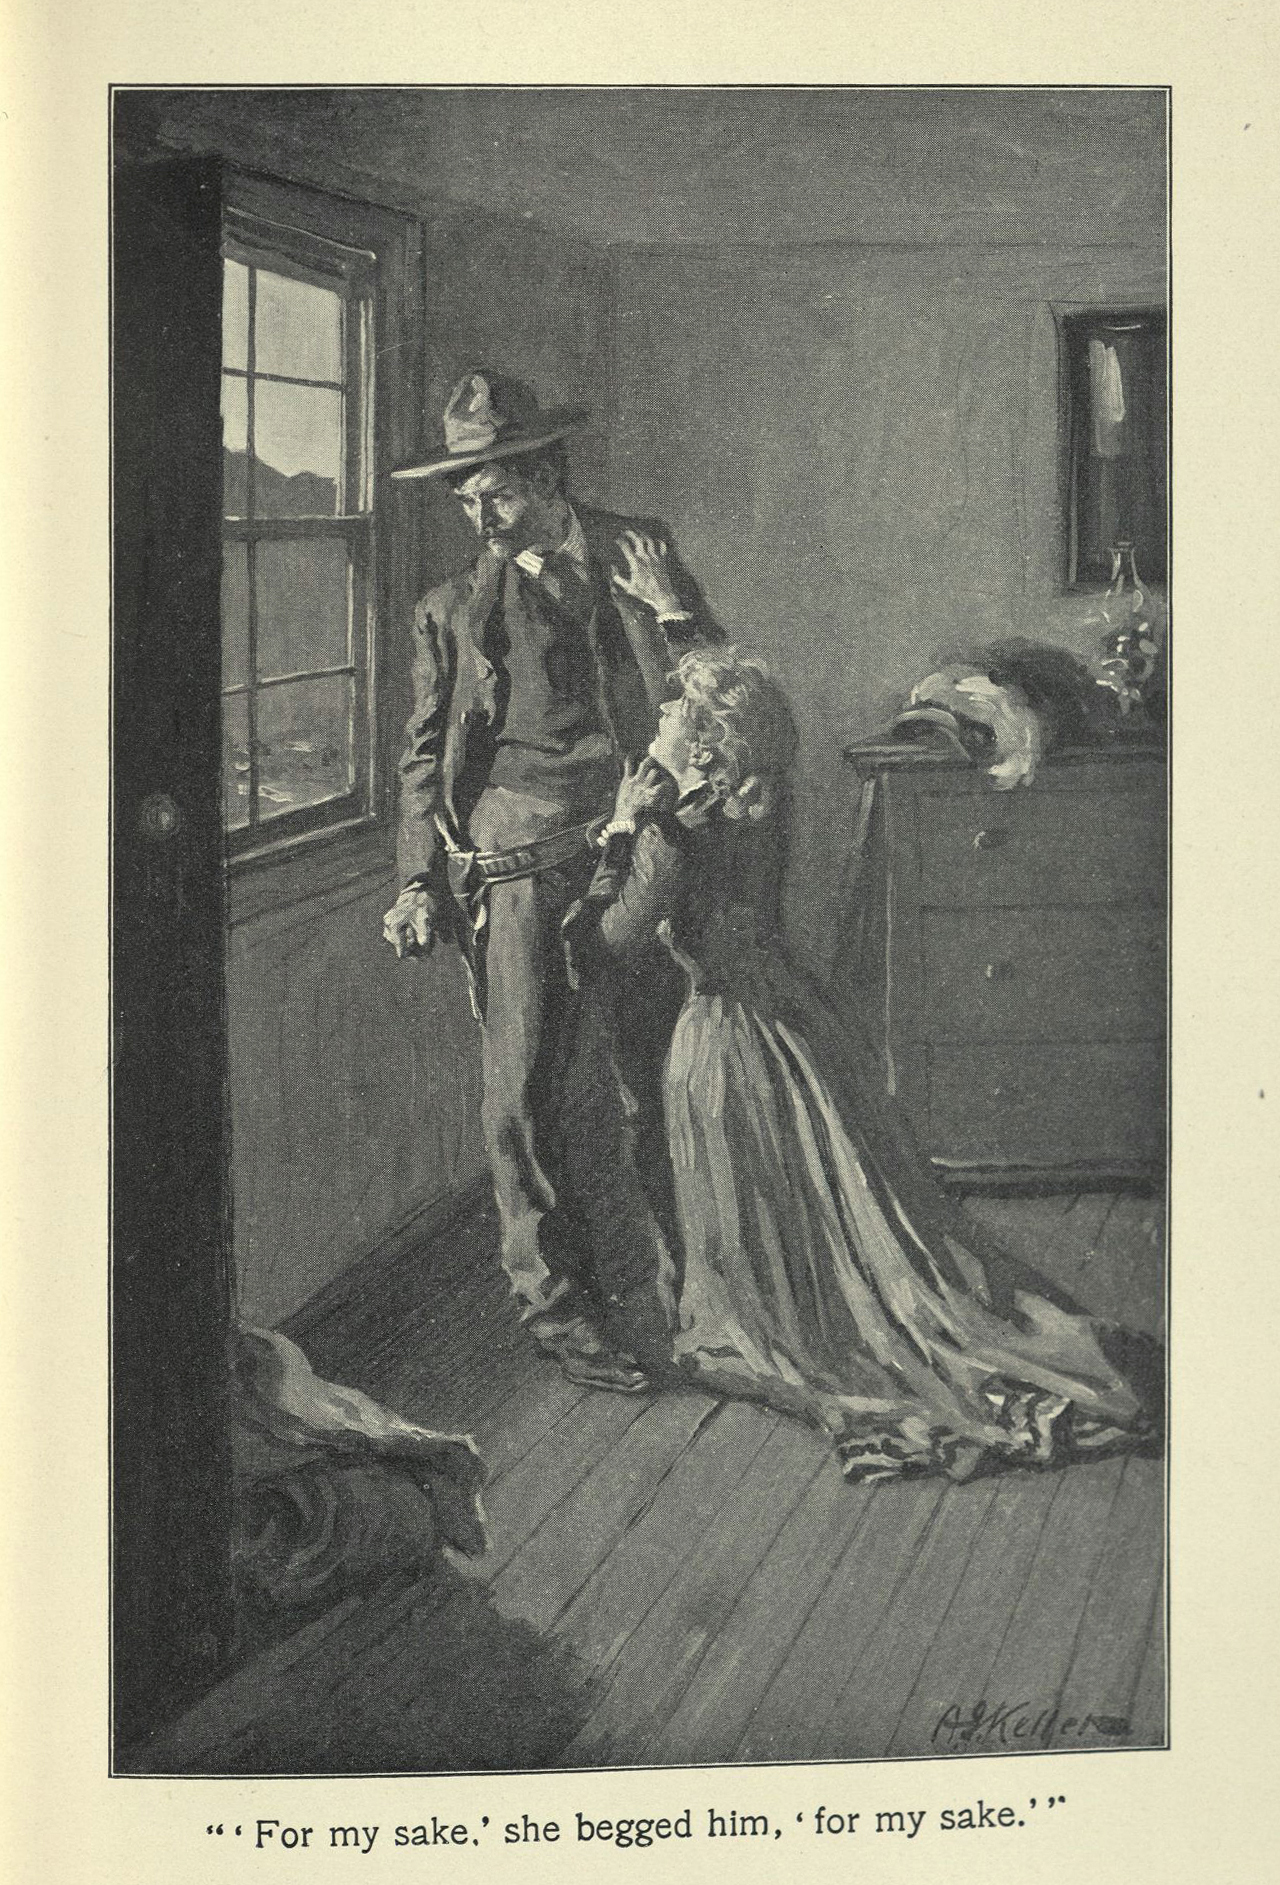 The Virginian, image opposite page 476